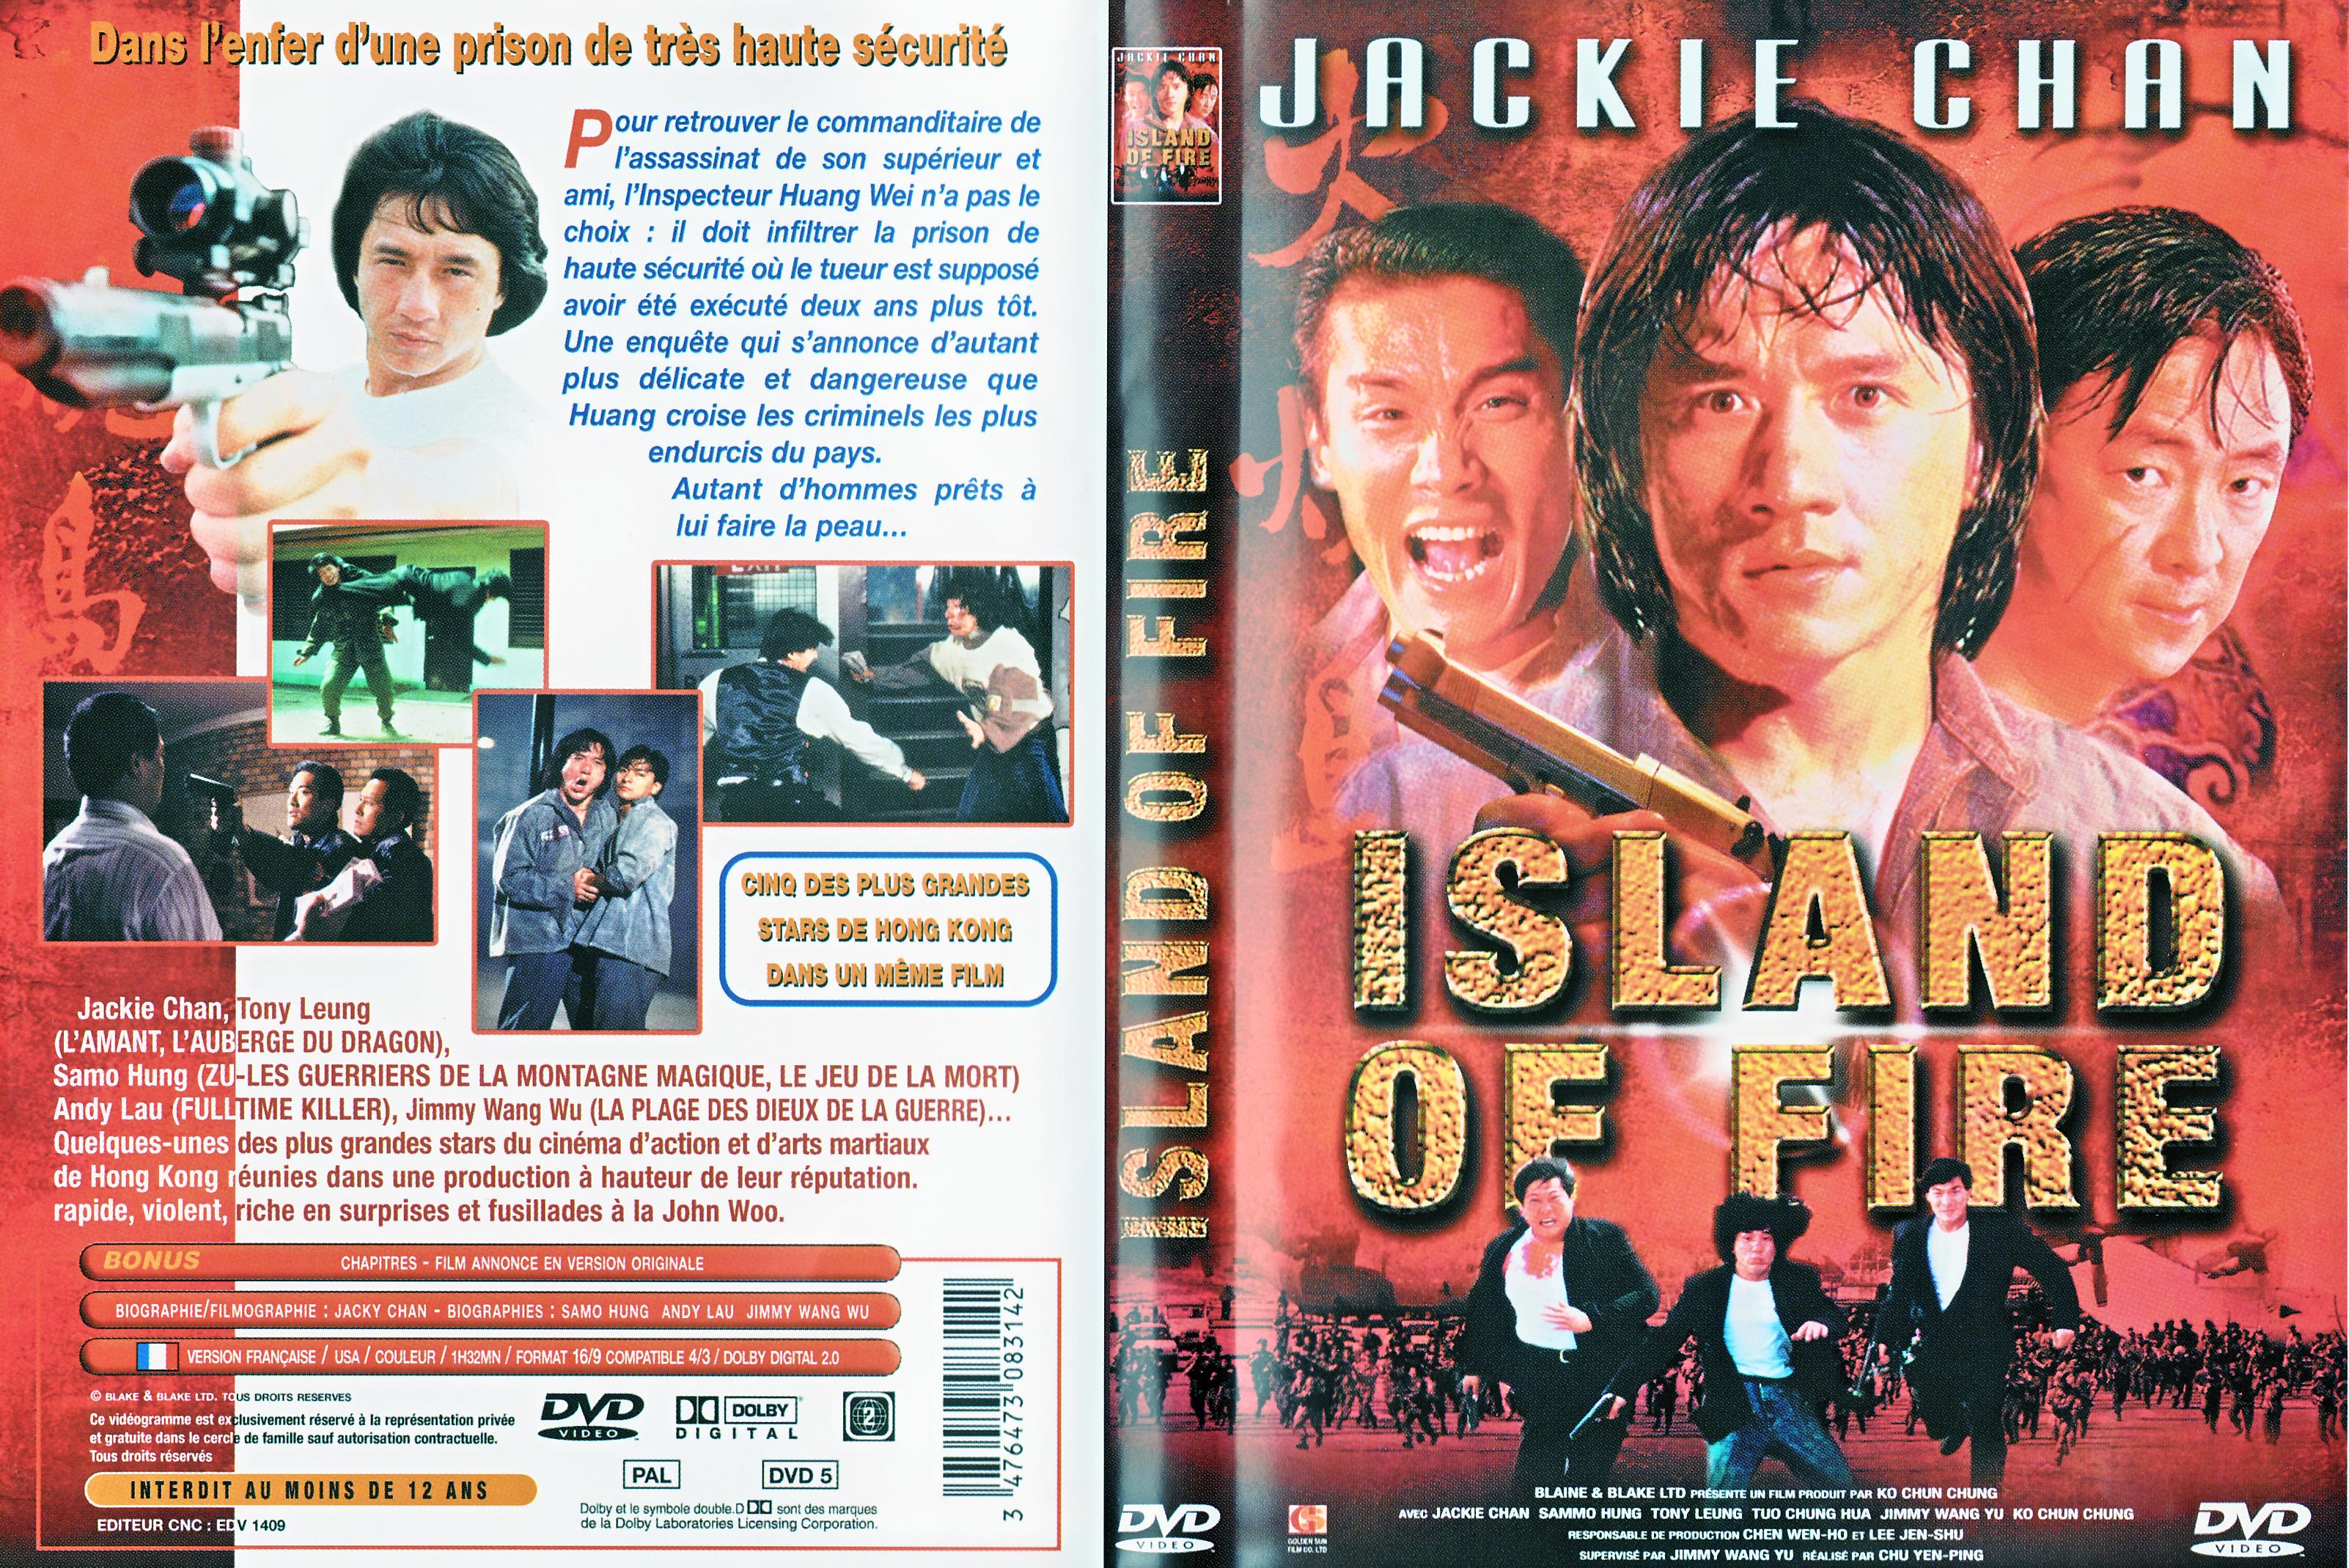 Jaquette DVD Island of fire v2